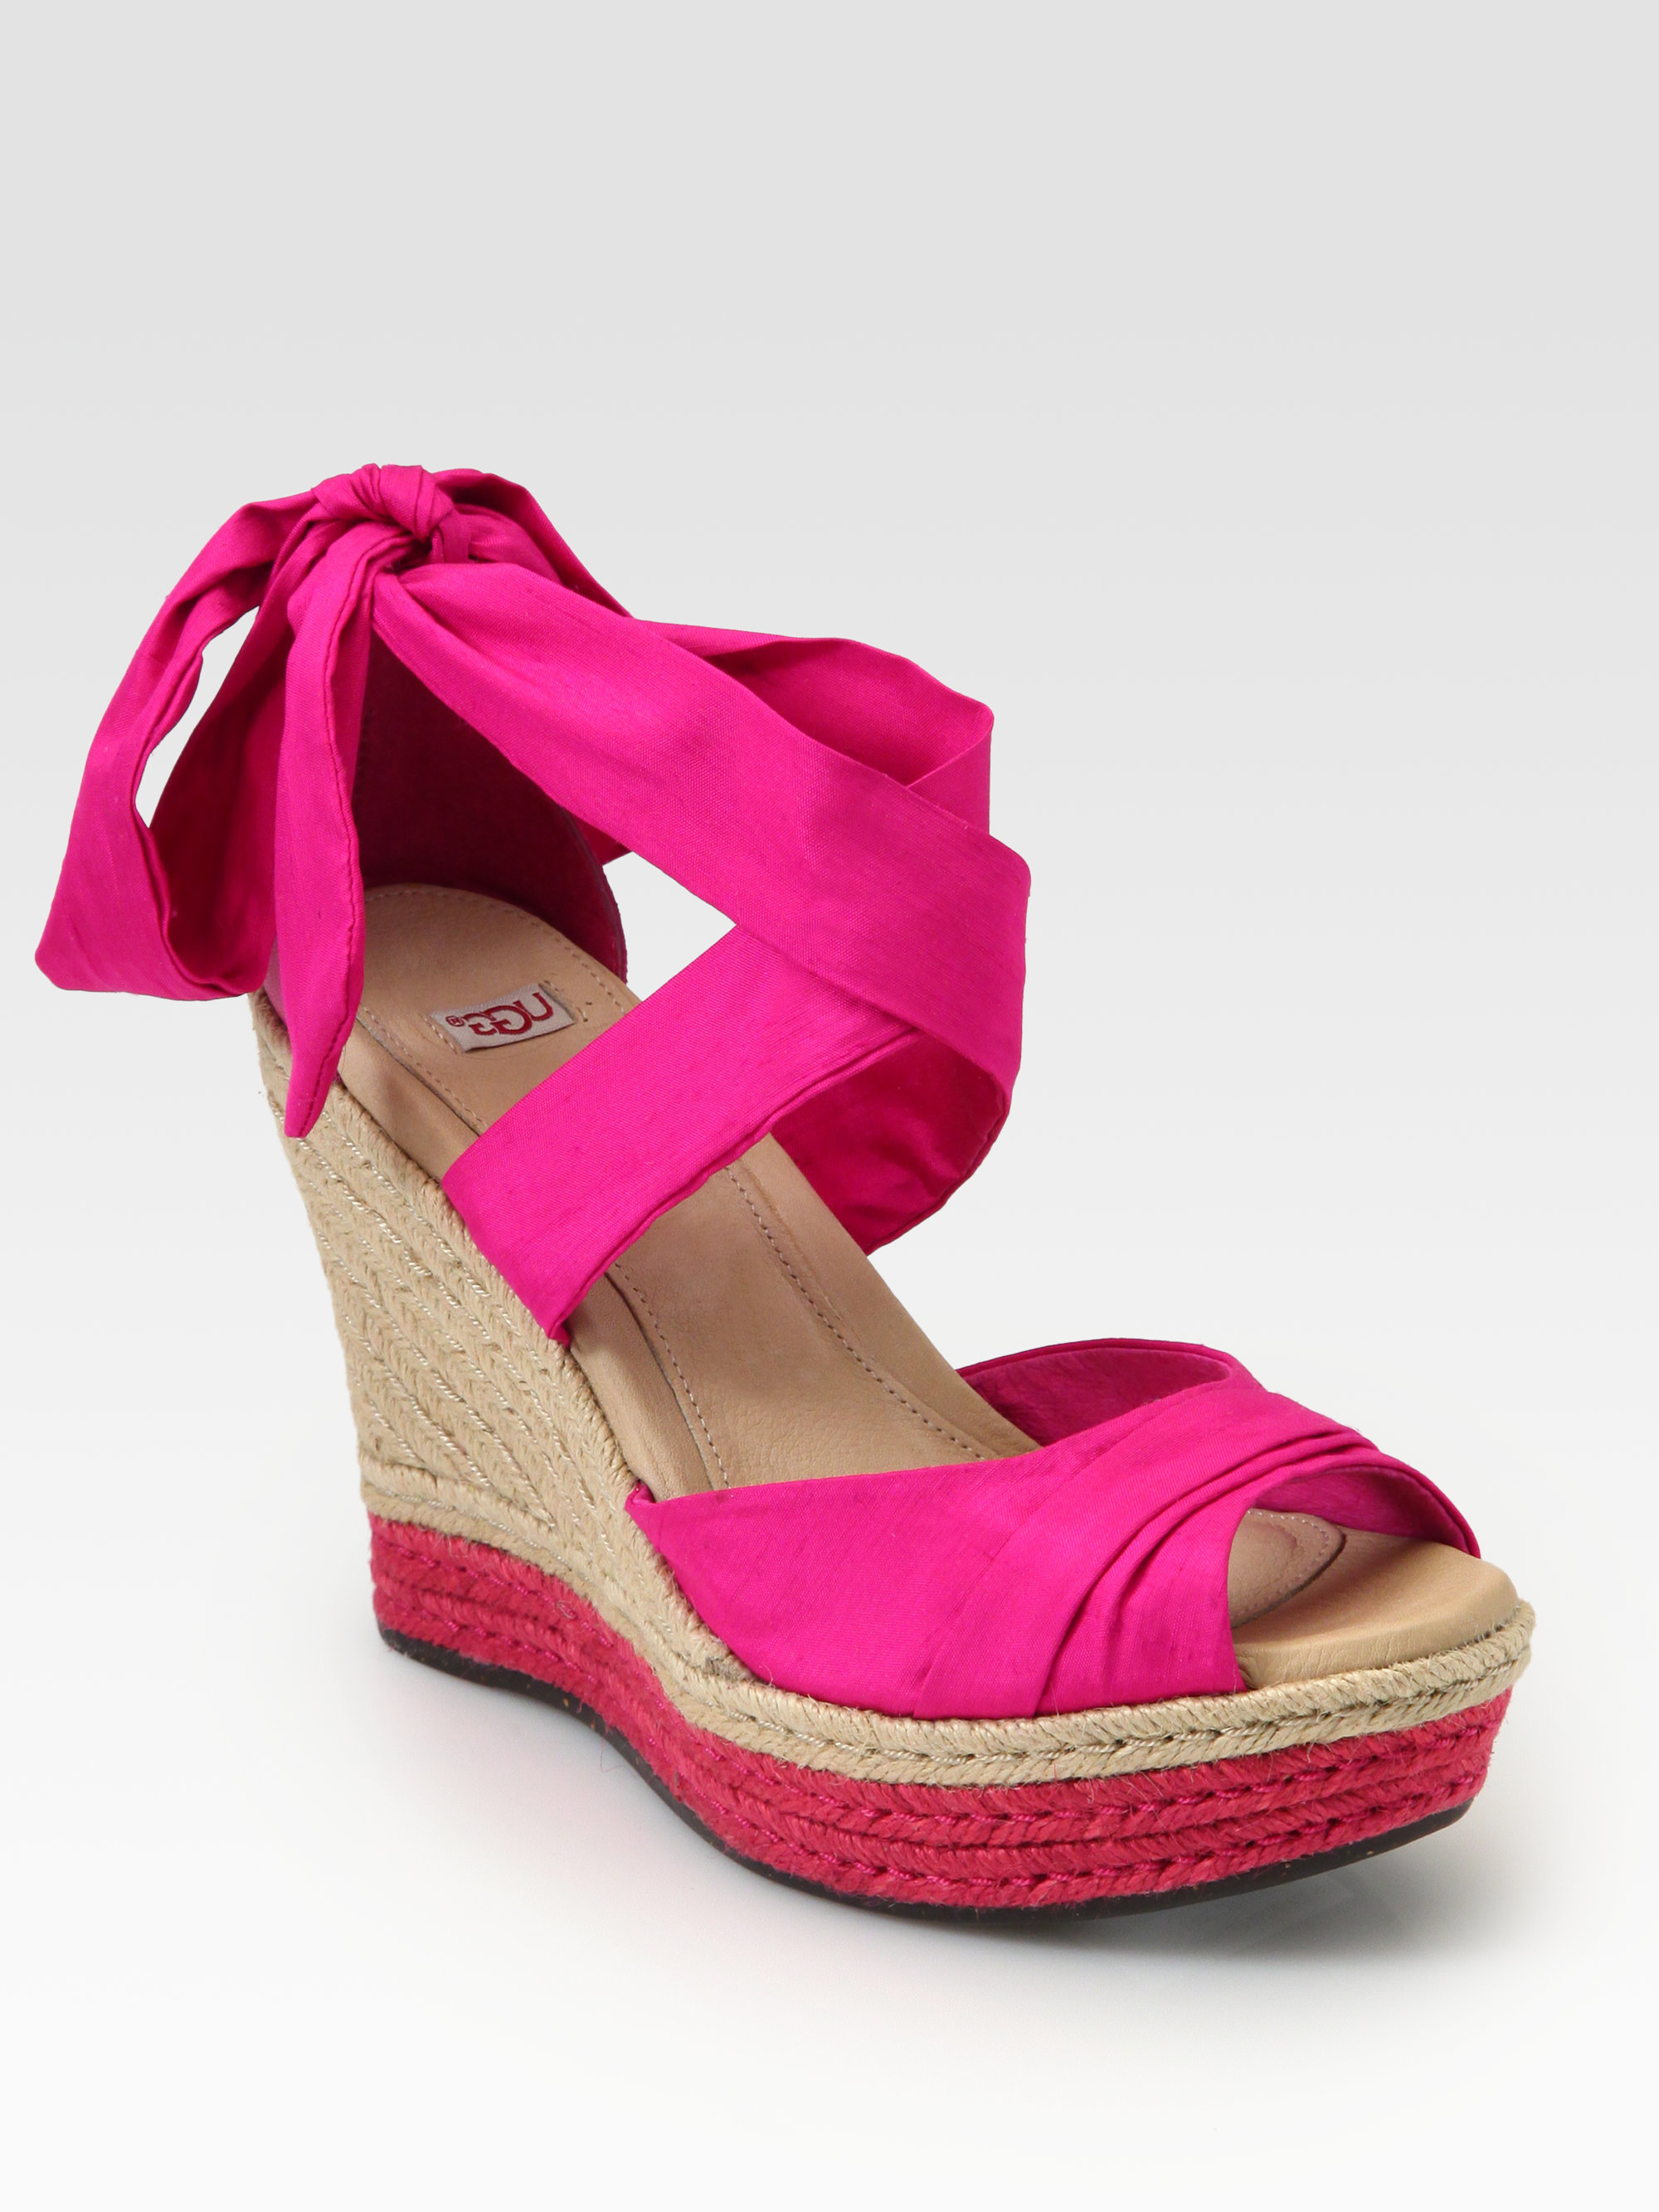 UGG Lucianna Silk Leather Espadrille Wedges in Raspberry Sorbet (Pink) -  Lyst